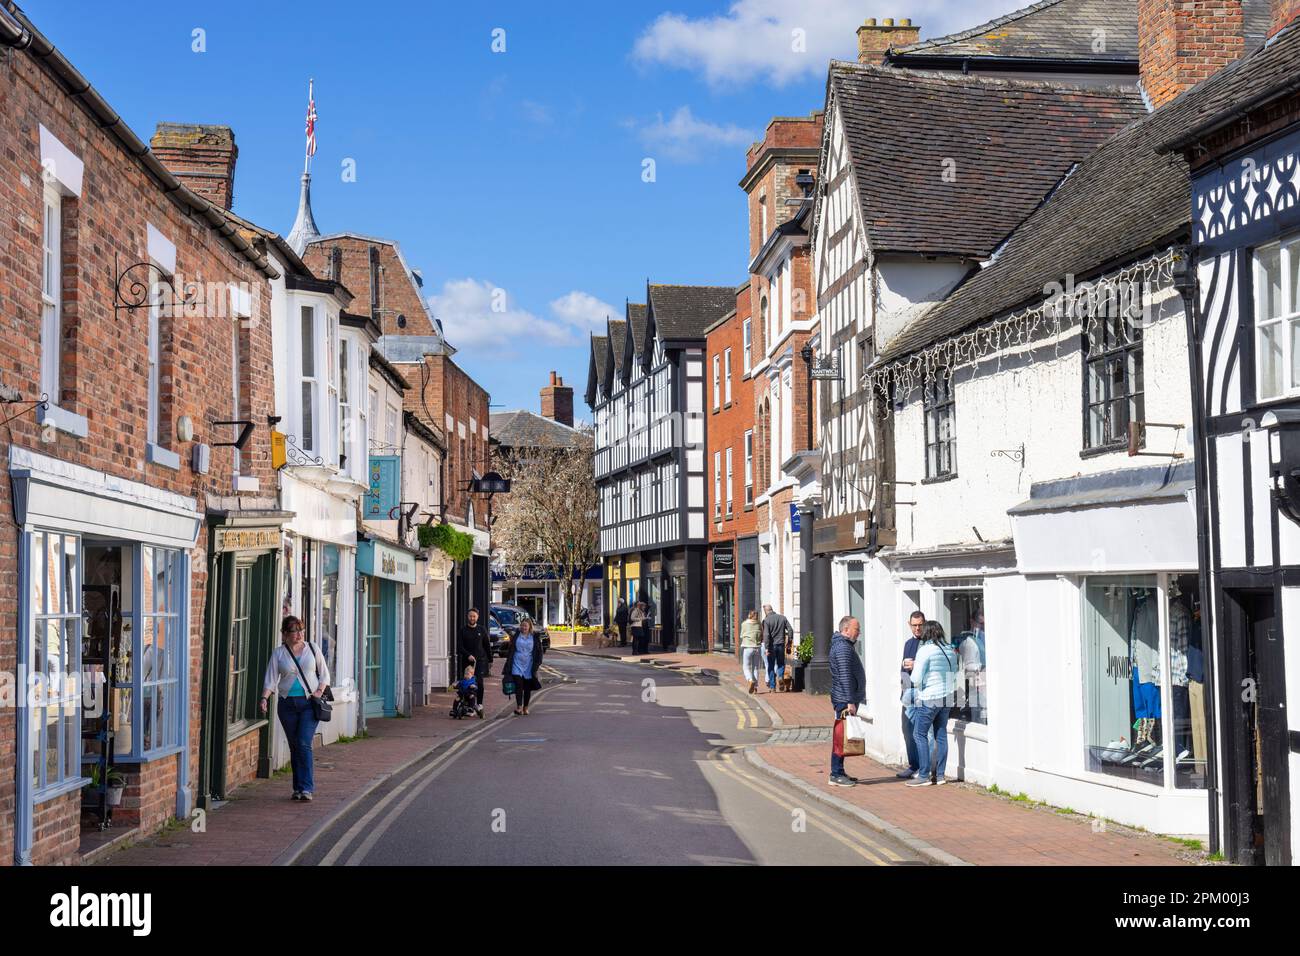 Nantwich Cheshire East - Nantwich Hospital street with half timbered buildings and people shopping Nantwich Cheshire England UK GB Europe Stock Photo